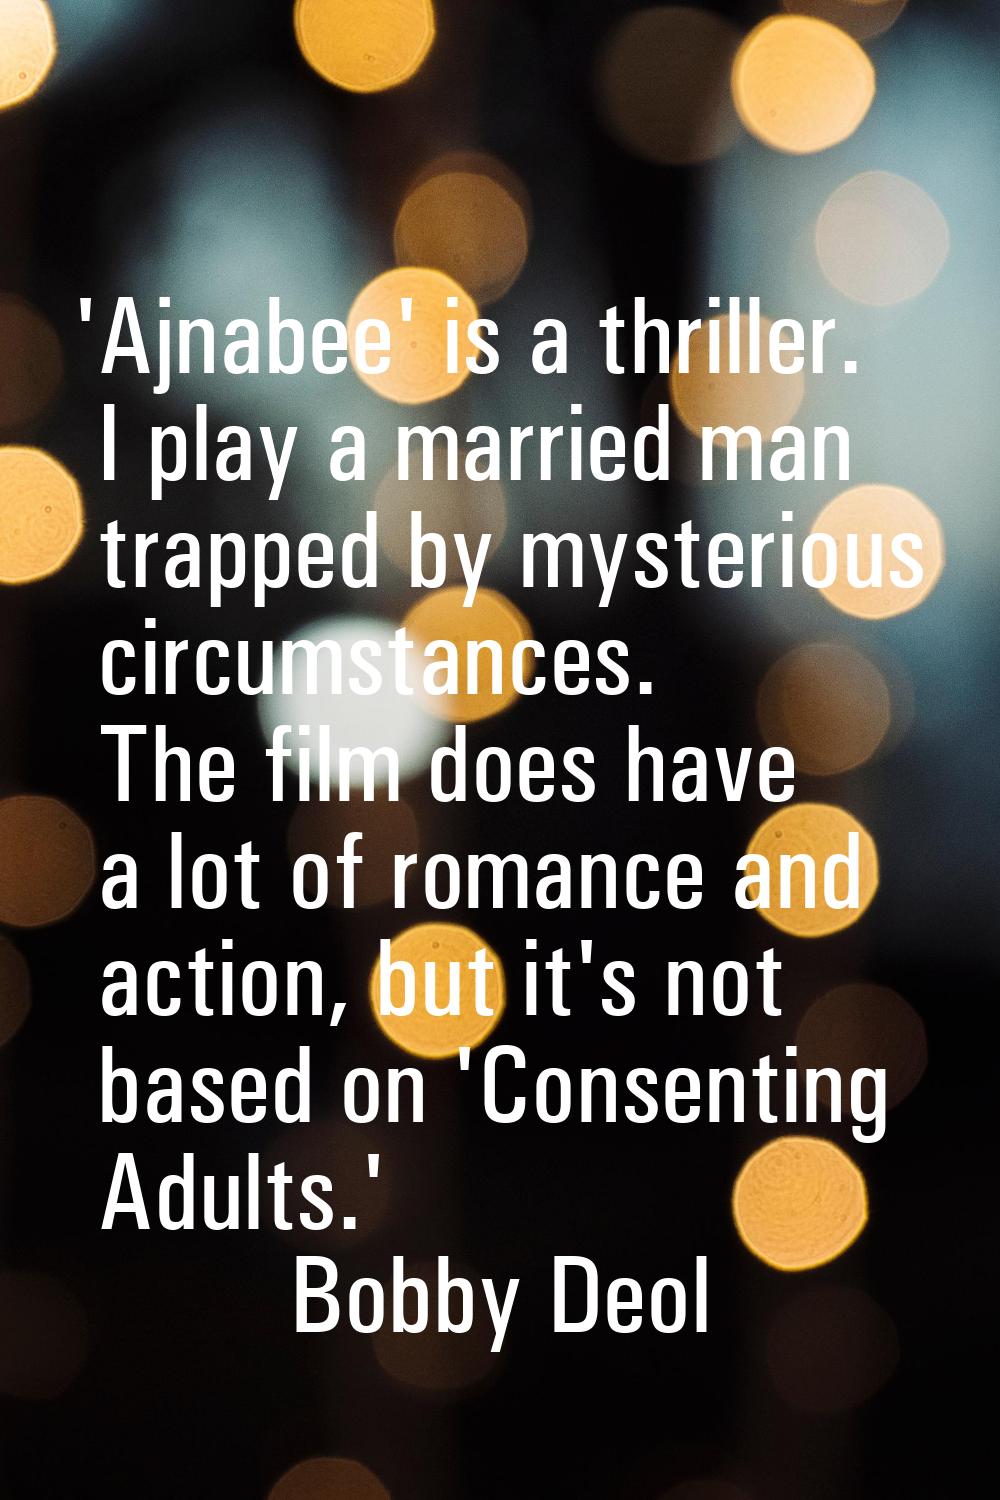 'Ajnabee' is a thriller. I play a married man trapped by mysterious circumstances. The film does ha